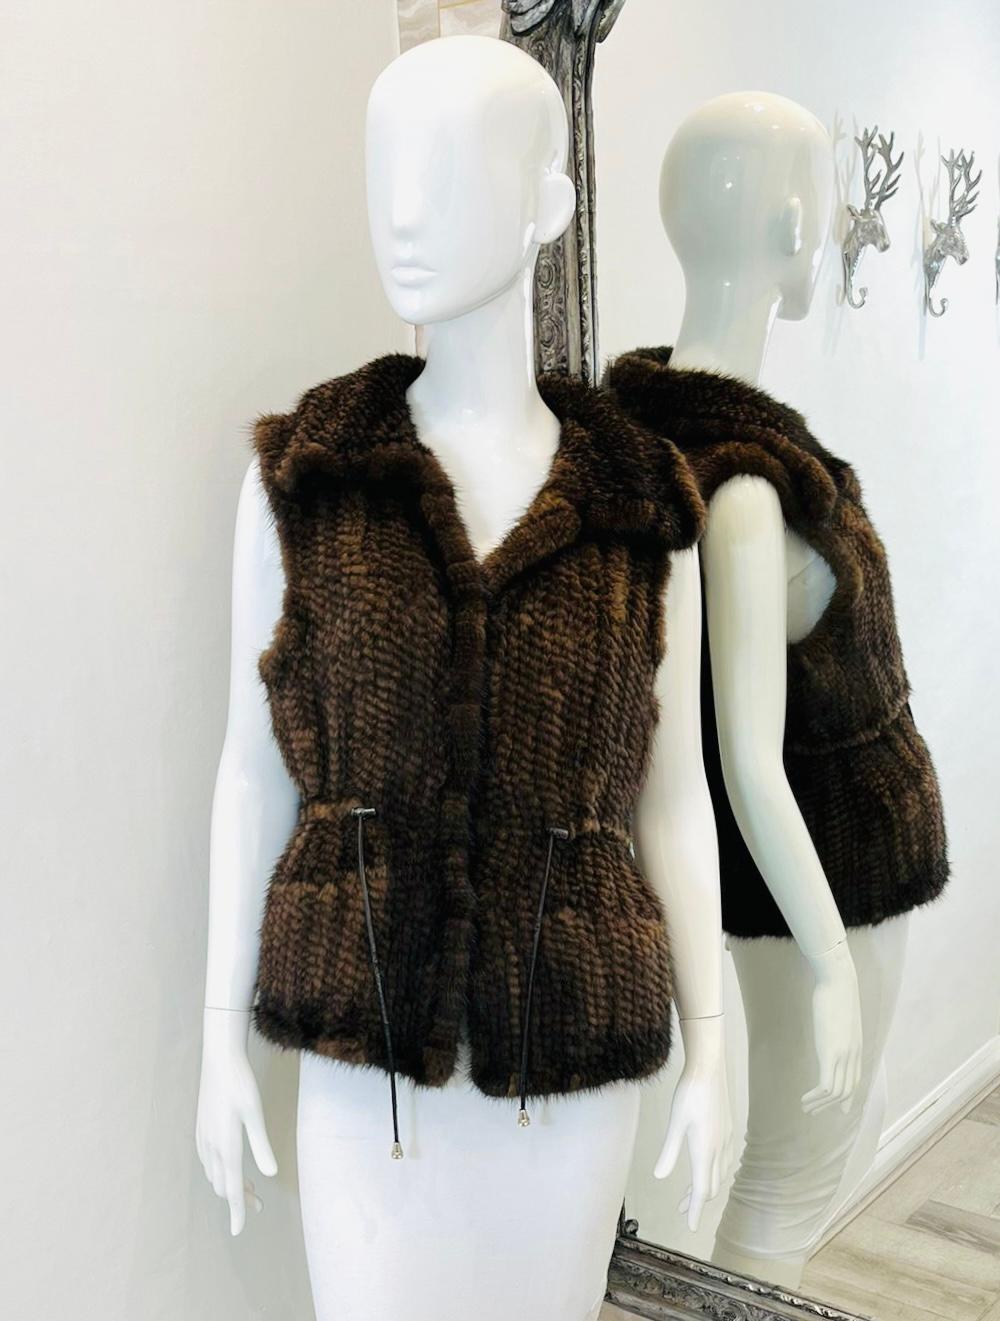 Mink Fur Drawstring Detailed Gilet

Brown sleeveless gilet crafted from richly textured mink fur.

Styled with collared neckline and waist emphasising drawstring detail.

Featuring hook-and-eye fastening.

Size – S/M (Label missing but